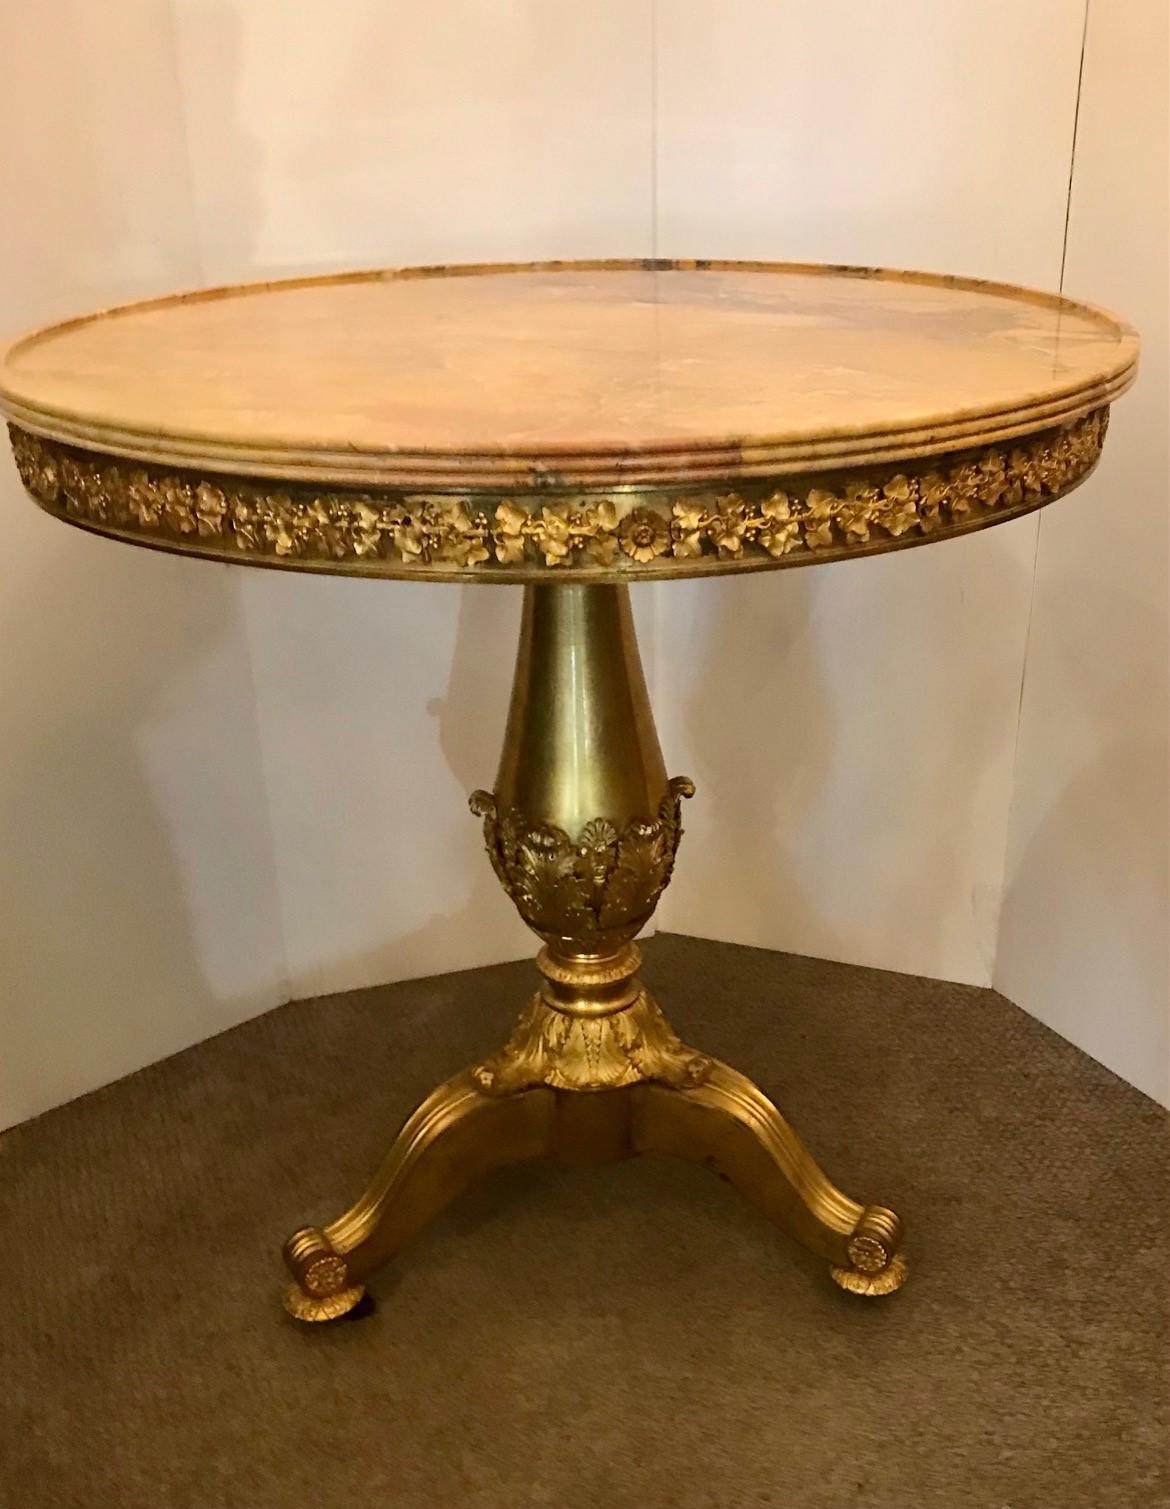 Charles X An important Restauration period ormolu Gueridon, c. 1820, Attributed to Thomire For Sale